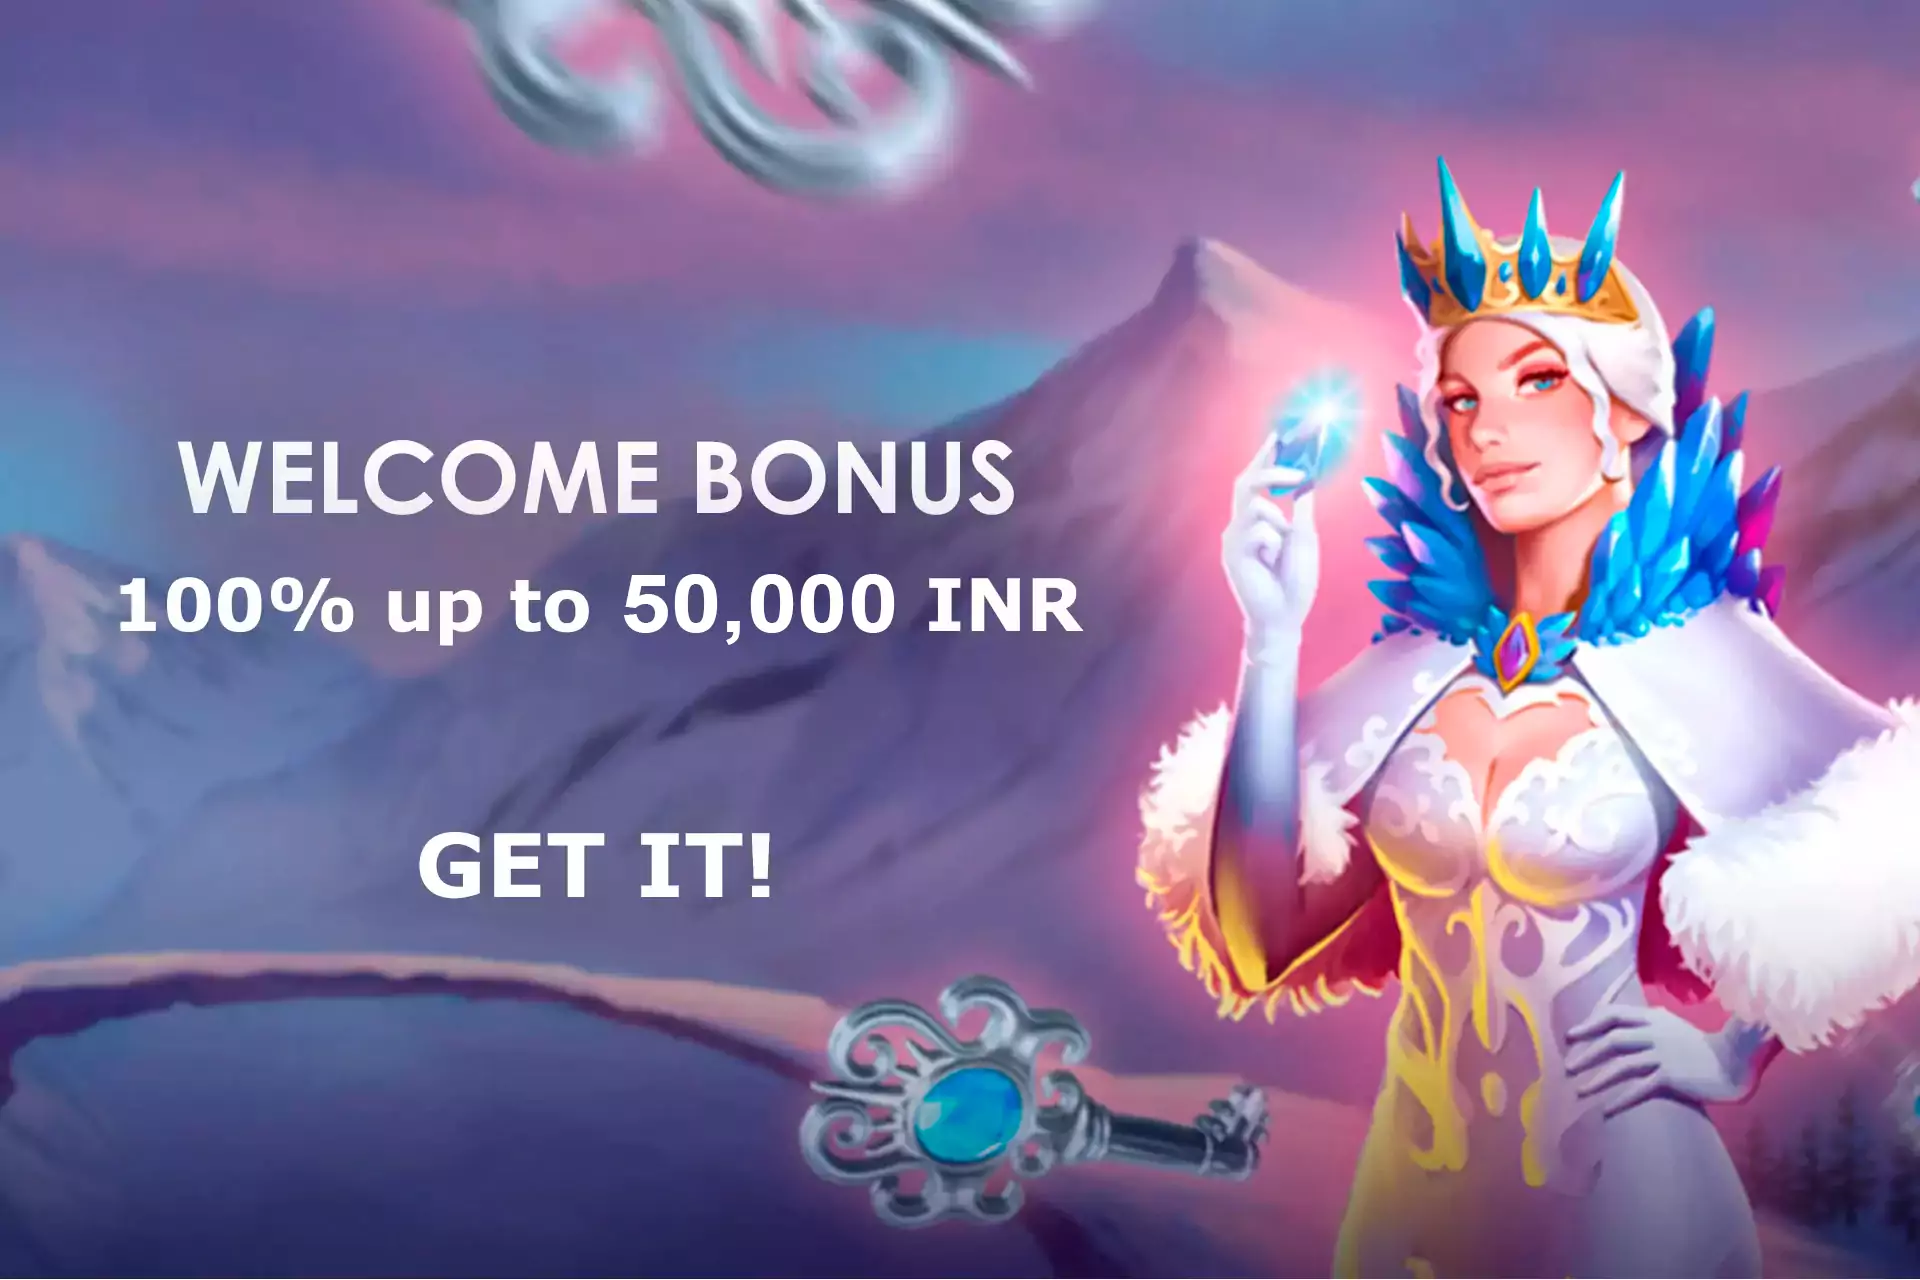 New users of Lilibet have a chance to get the welcome bonus after they make the first deposit.